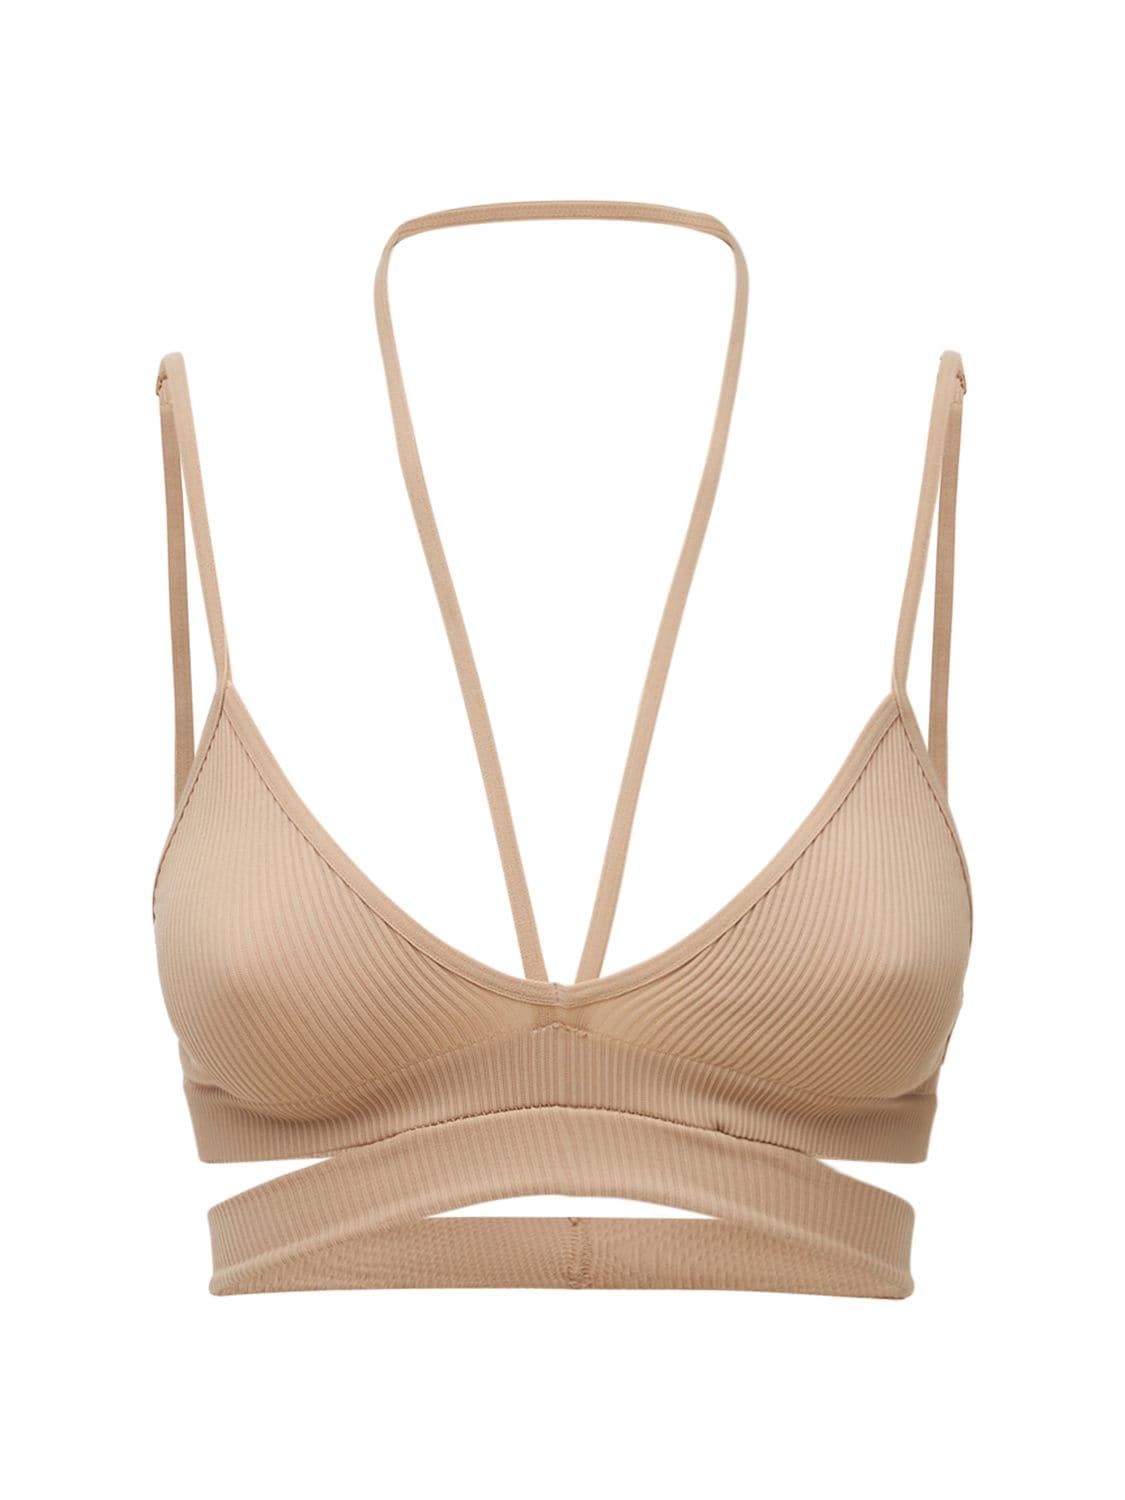 ANDREADAMO Ribbed Jersey Bra Top W/ Cut Outs